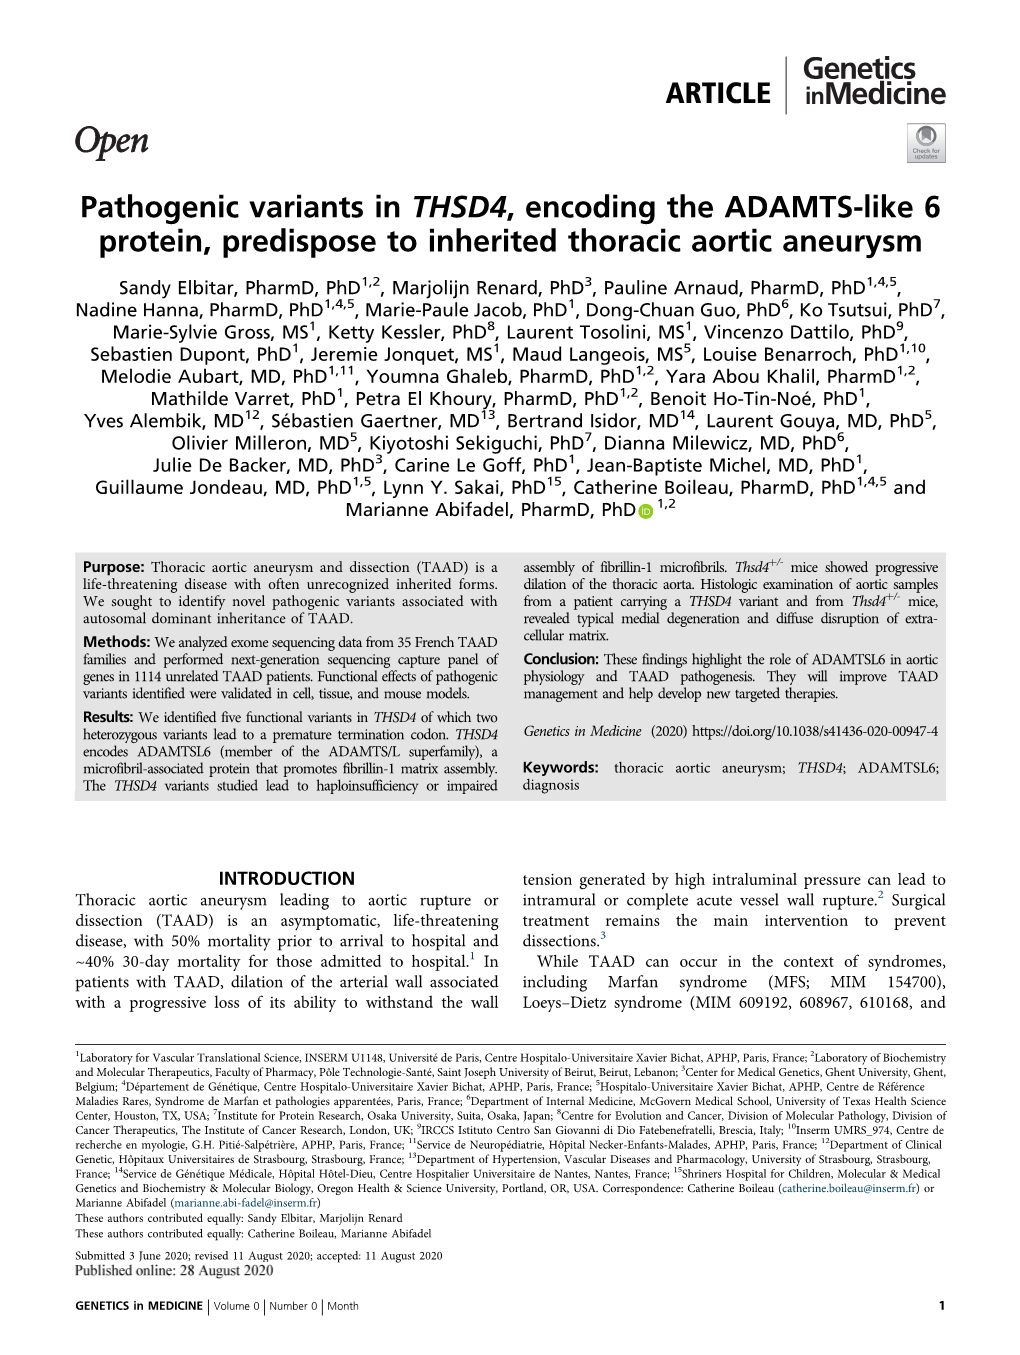 Pathogenic Variants in THSD4, Encoding the ADAMTS-Like 6 Protein, Predispose to Inherited Thoracic Aortic Aneurysm